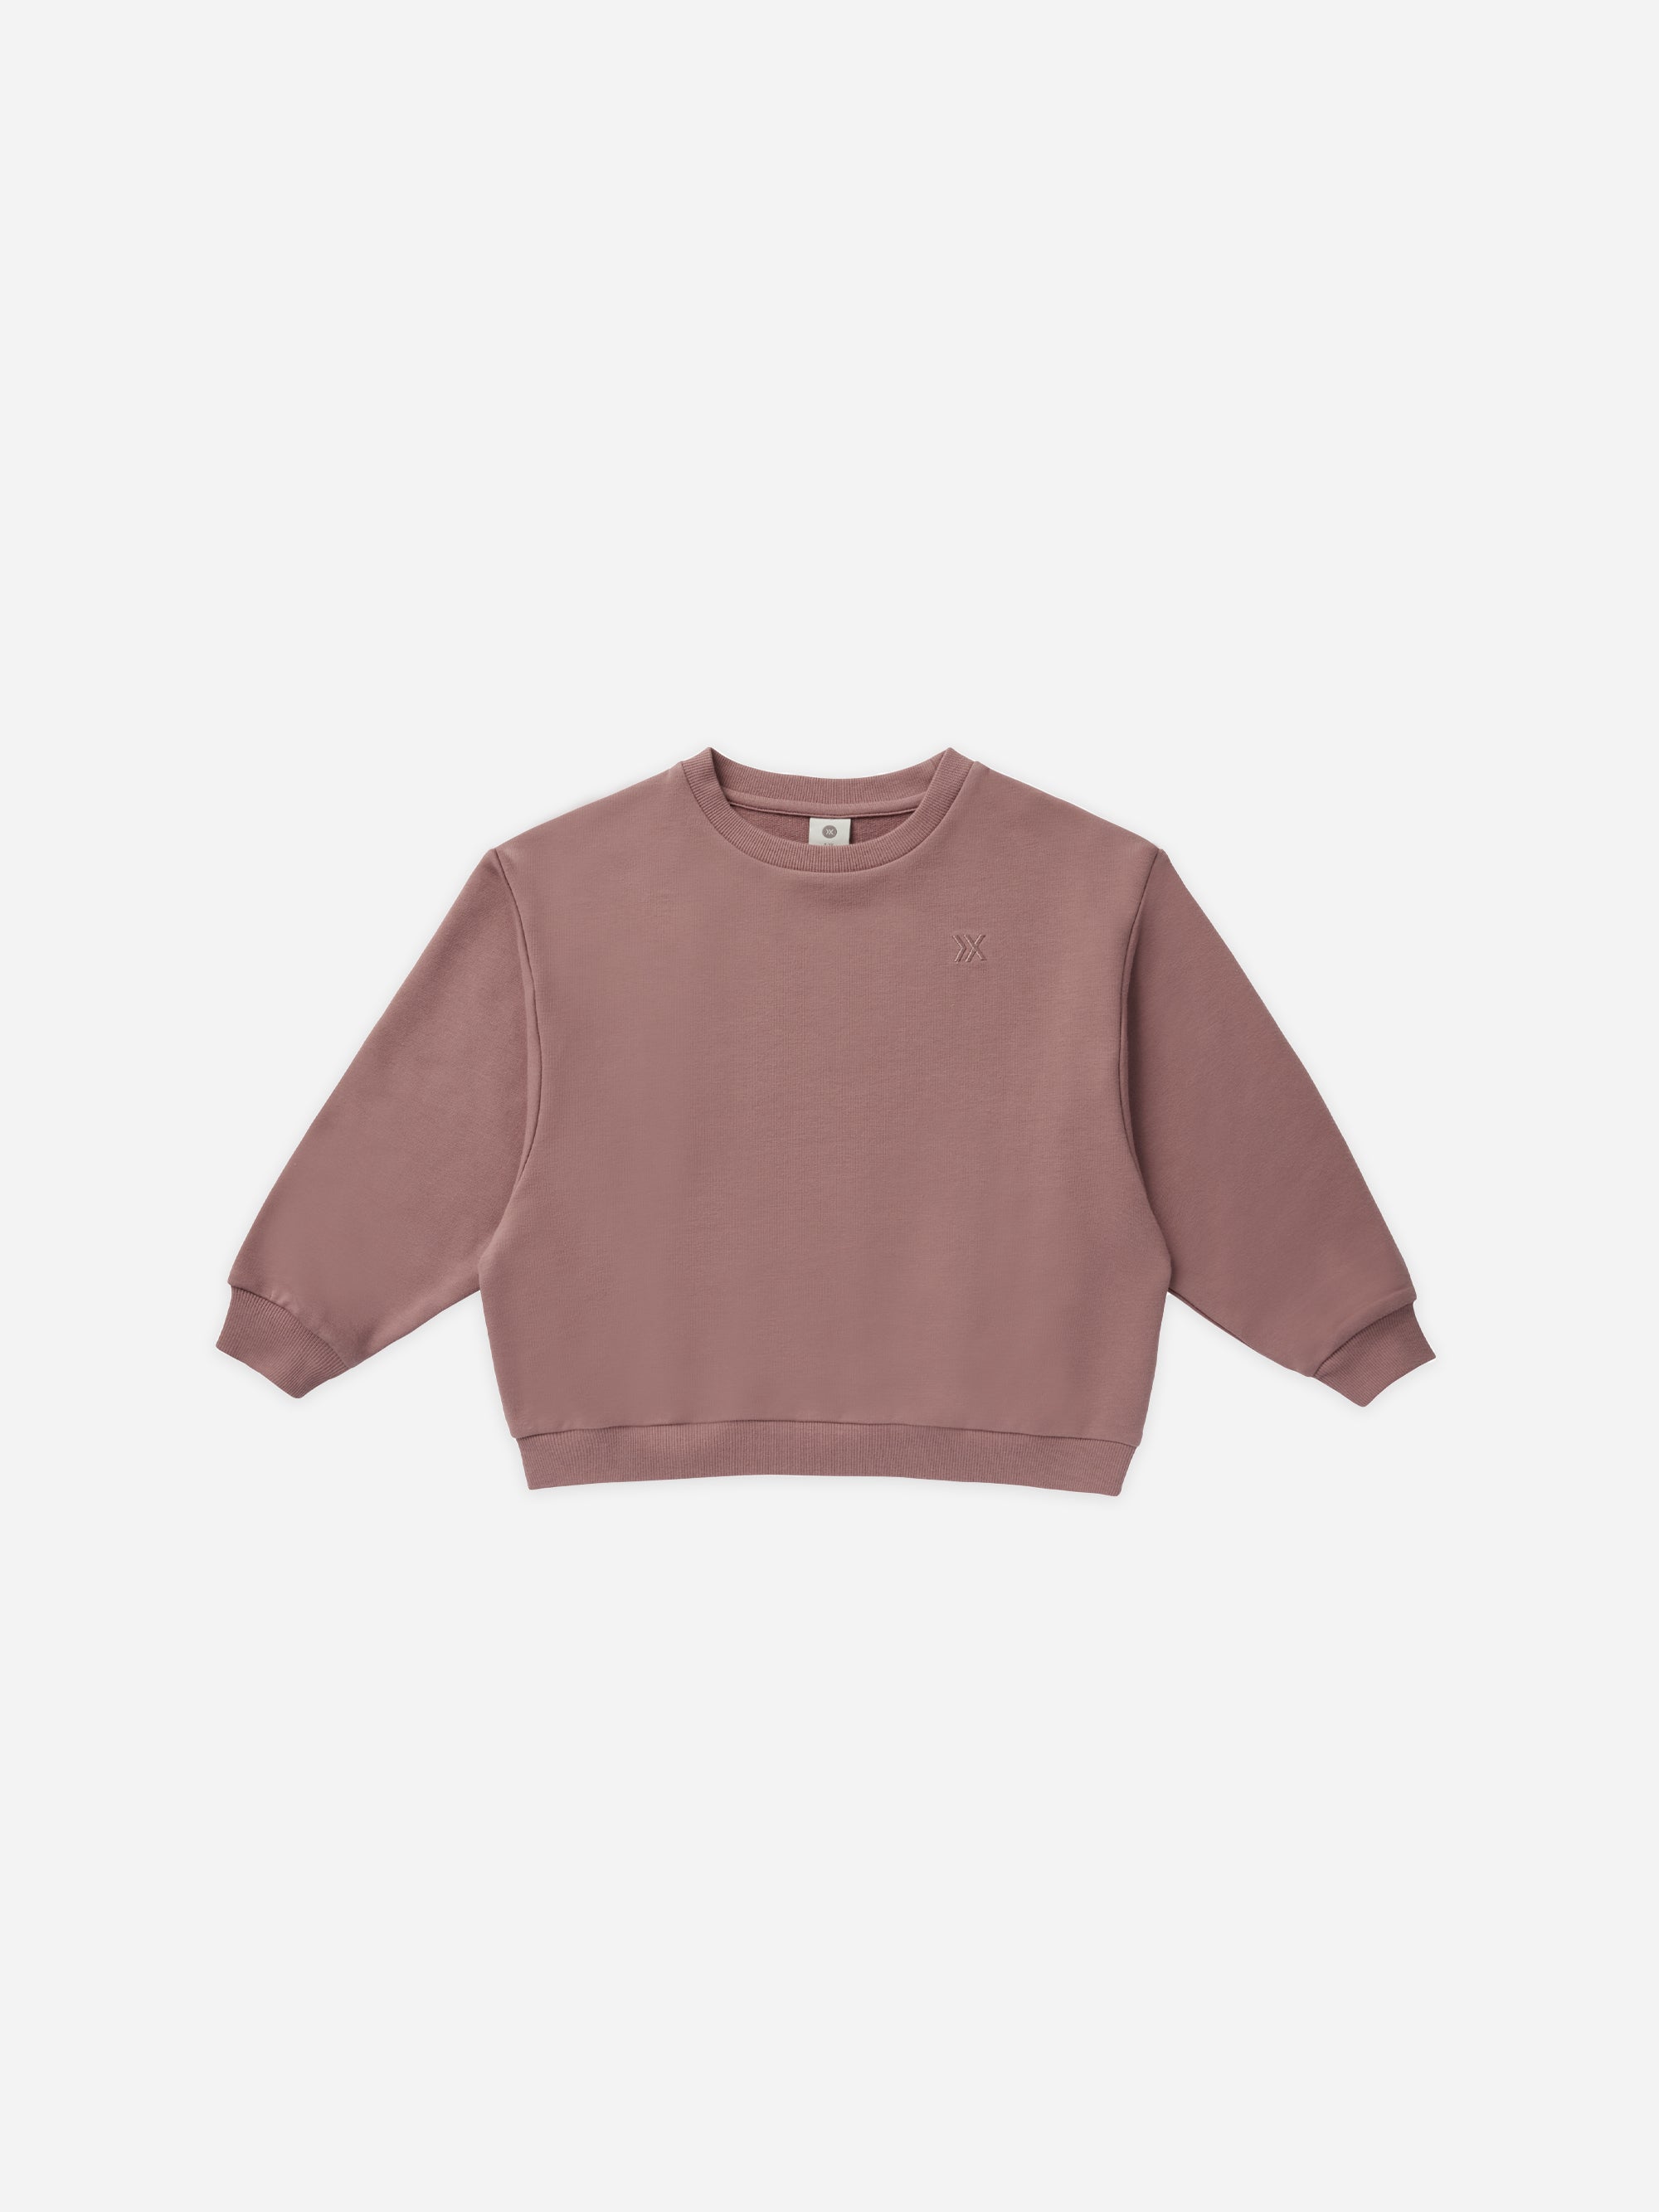 Relaxed Sweatshirt || Mulberry